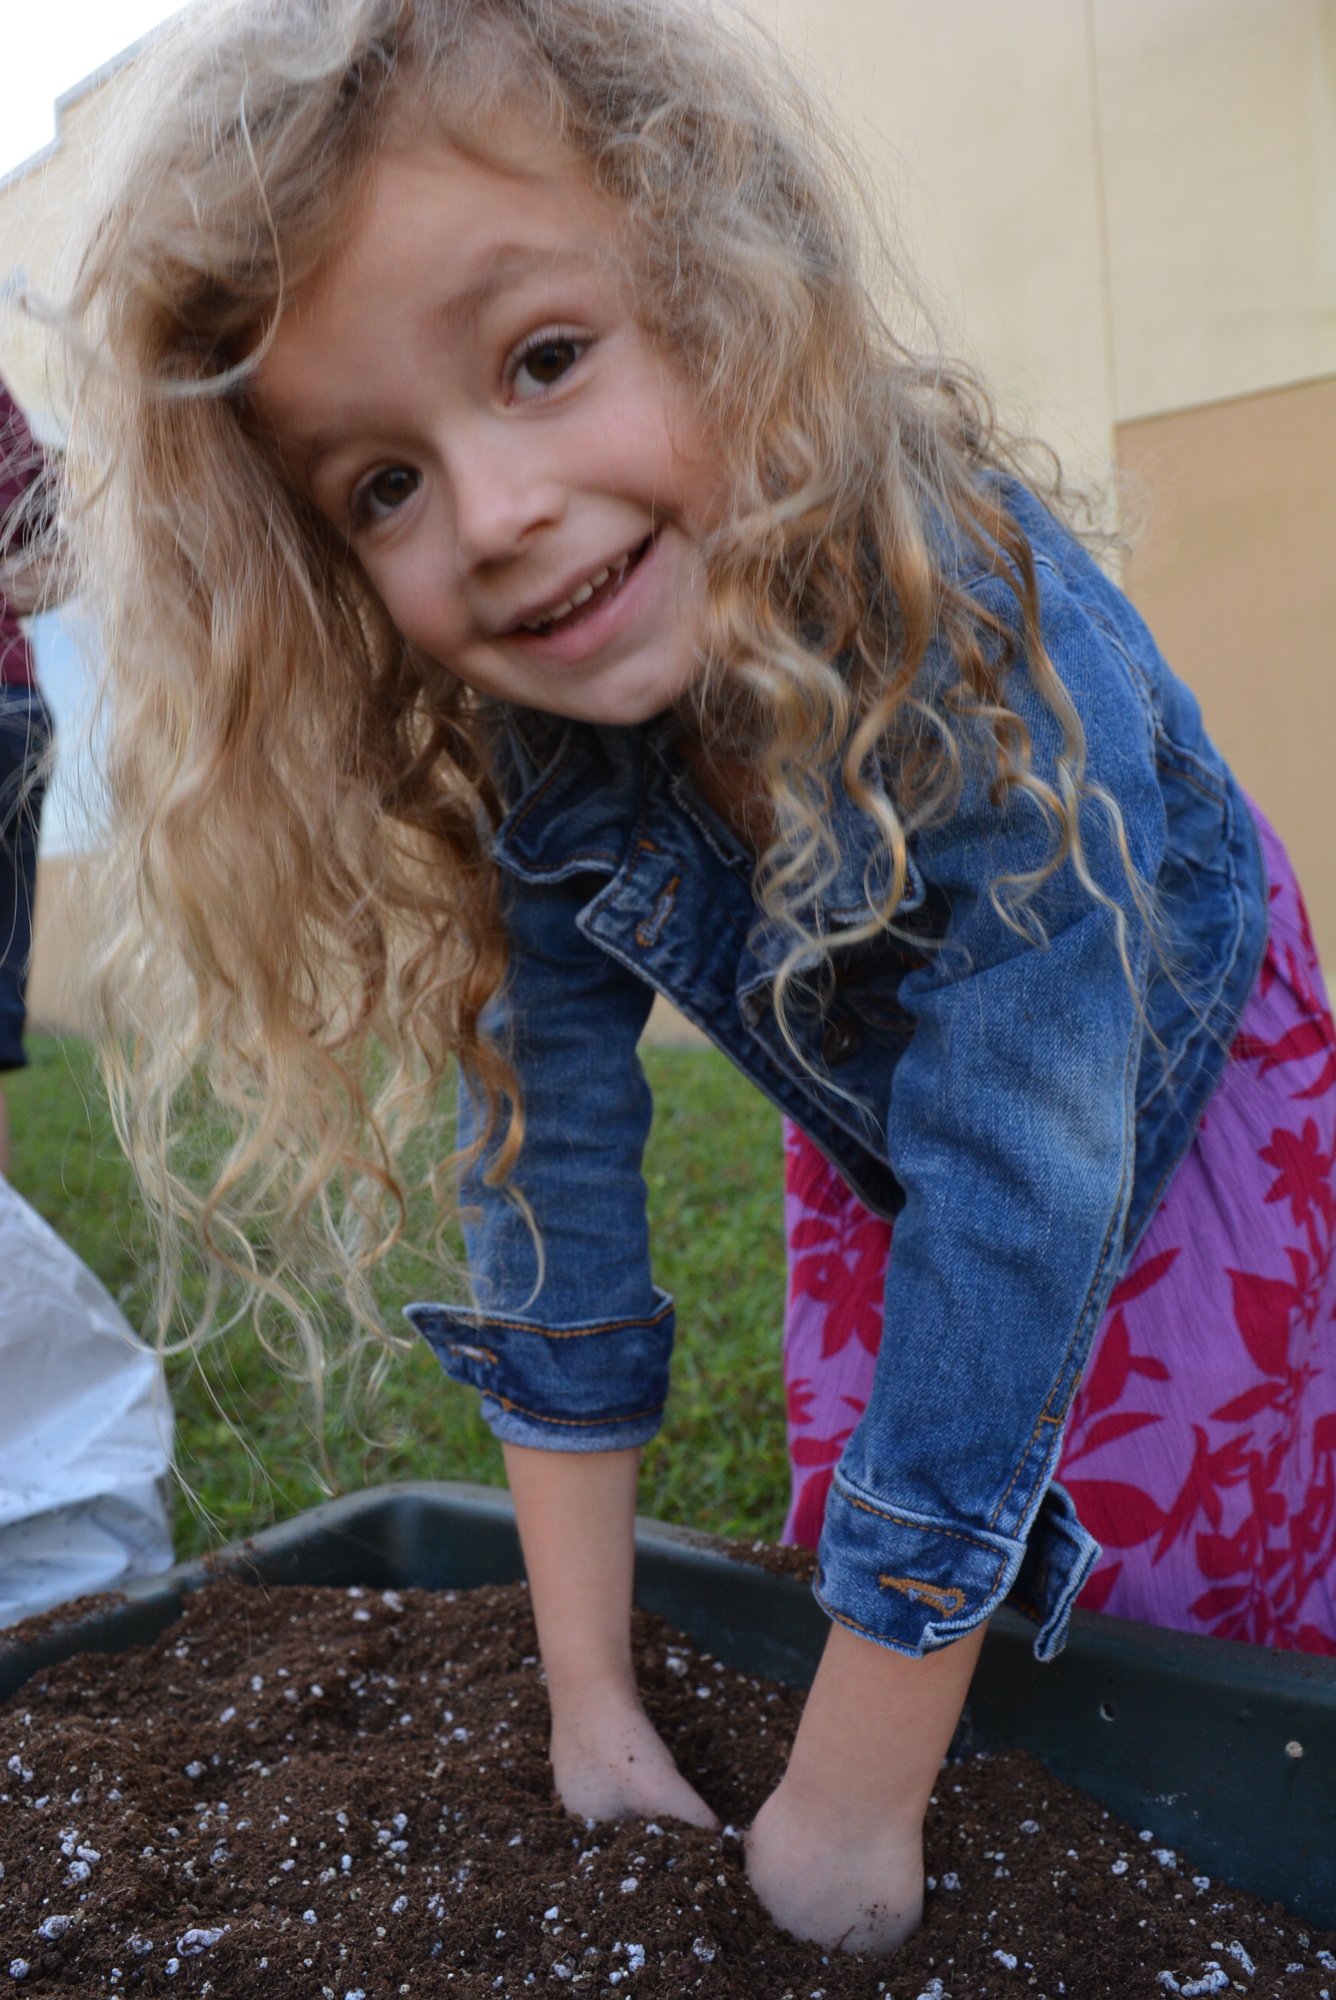 Five-year-old Emory Sanders says the dirt feels like pillows.